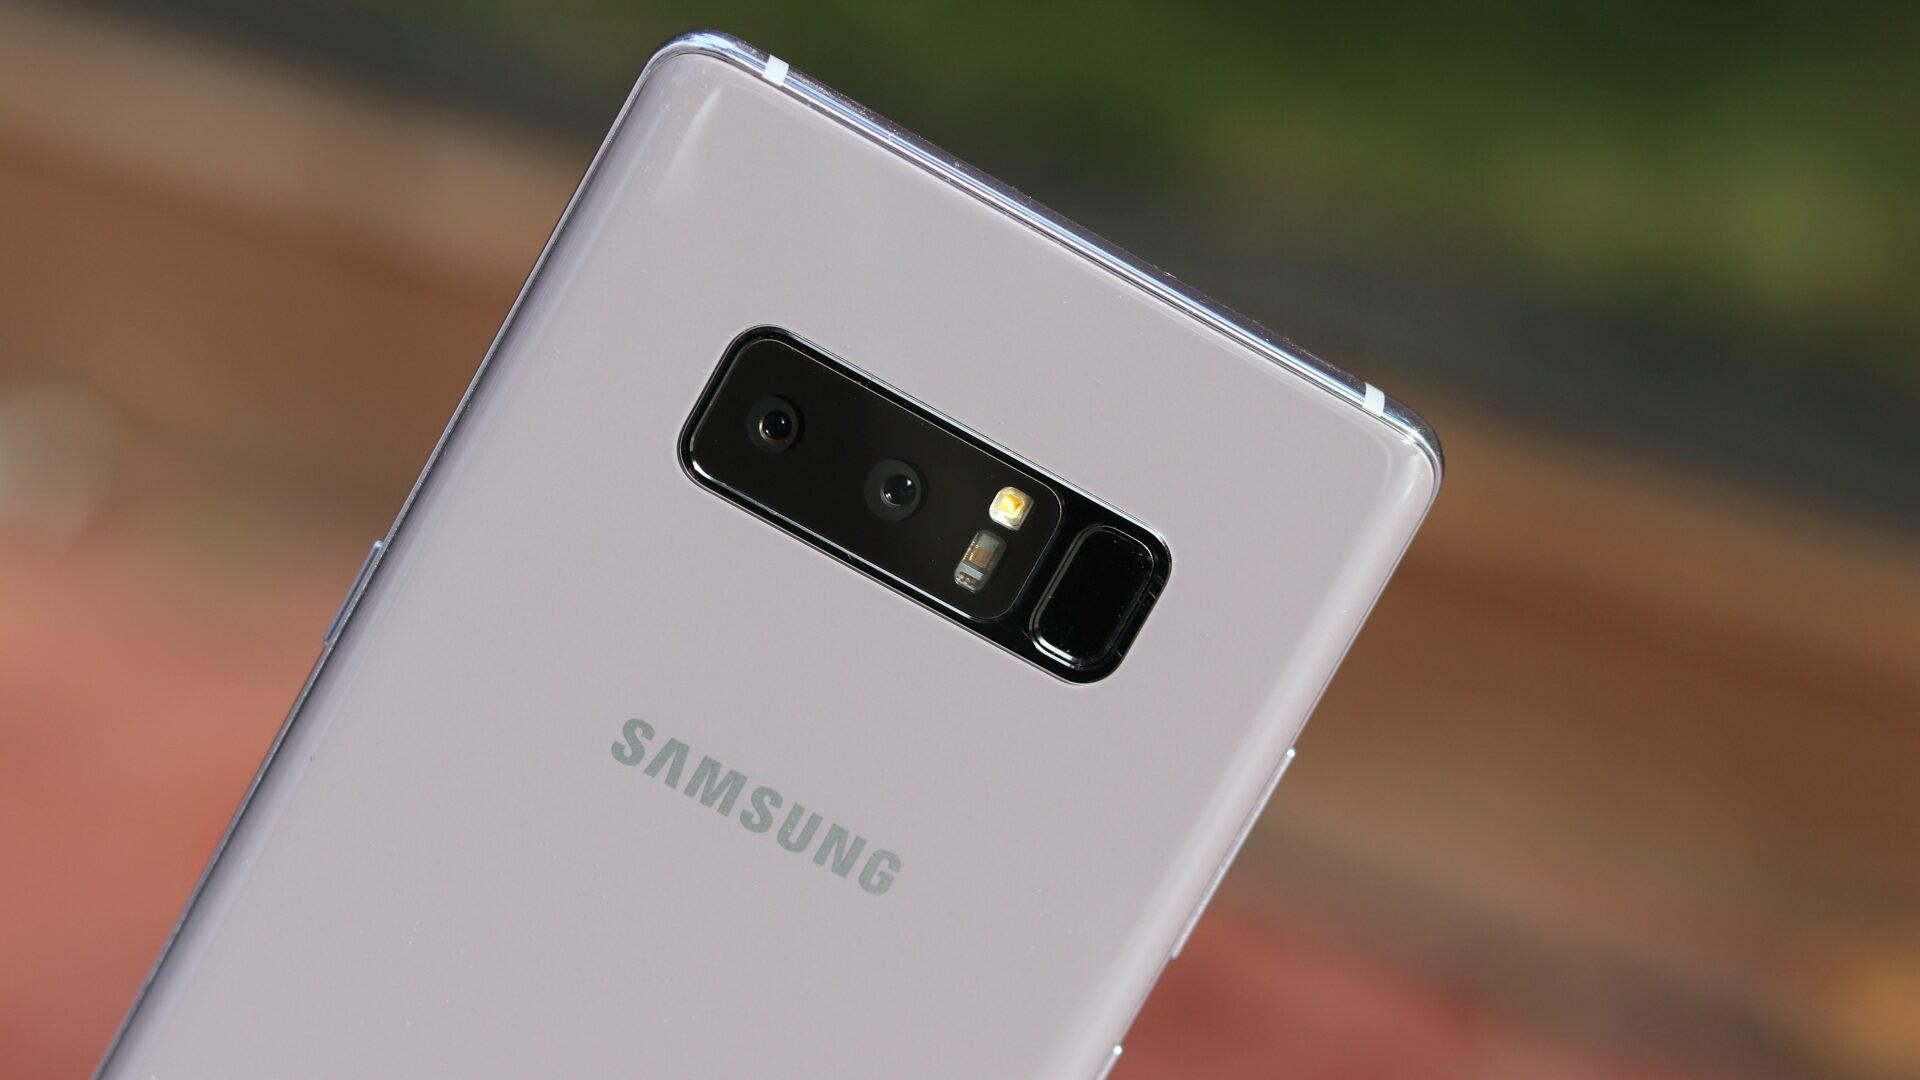 Samsung Brings Galaxy to More People: Introducing Galaxy S10 Lite and Note10  Lite – Samsung Global Newsroom